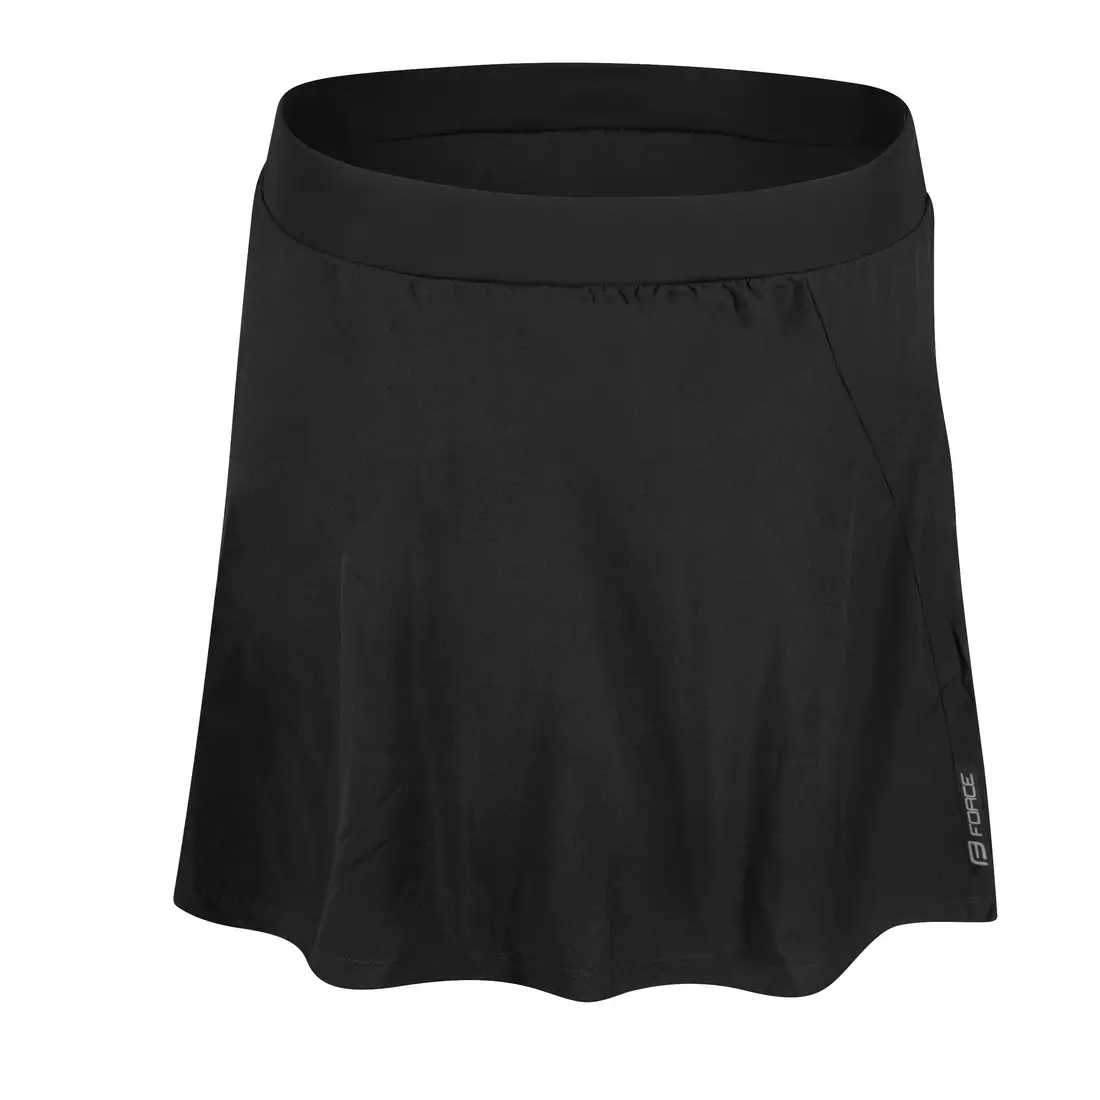 FORCE DAISY Bicycle skirt 2in1 black 